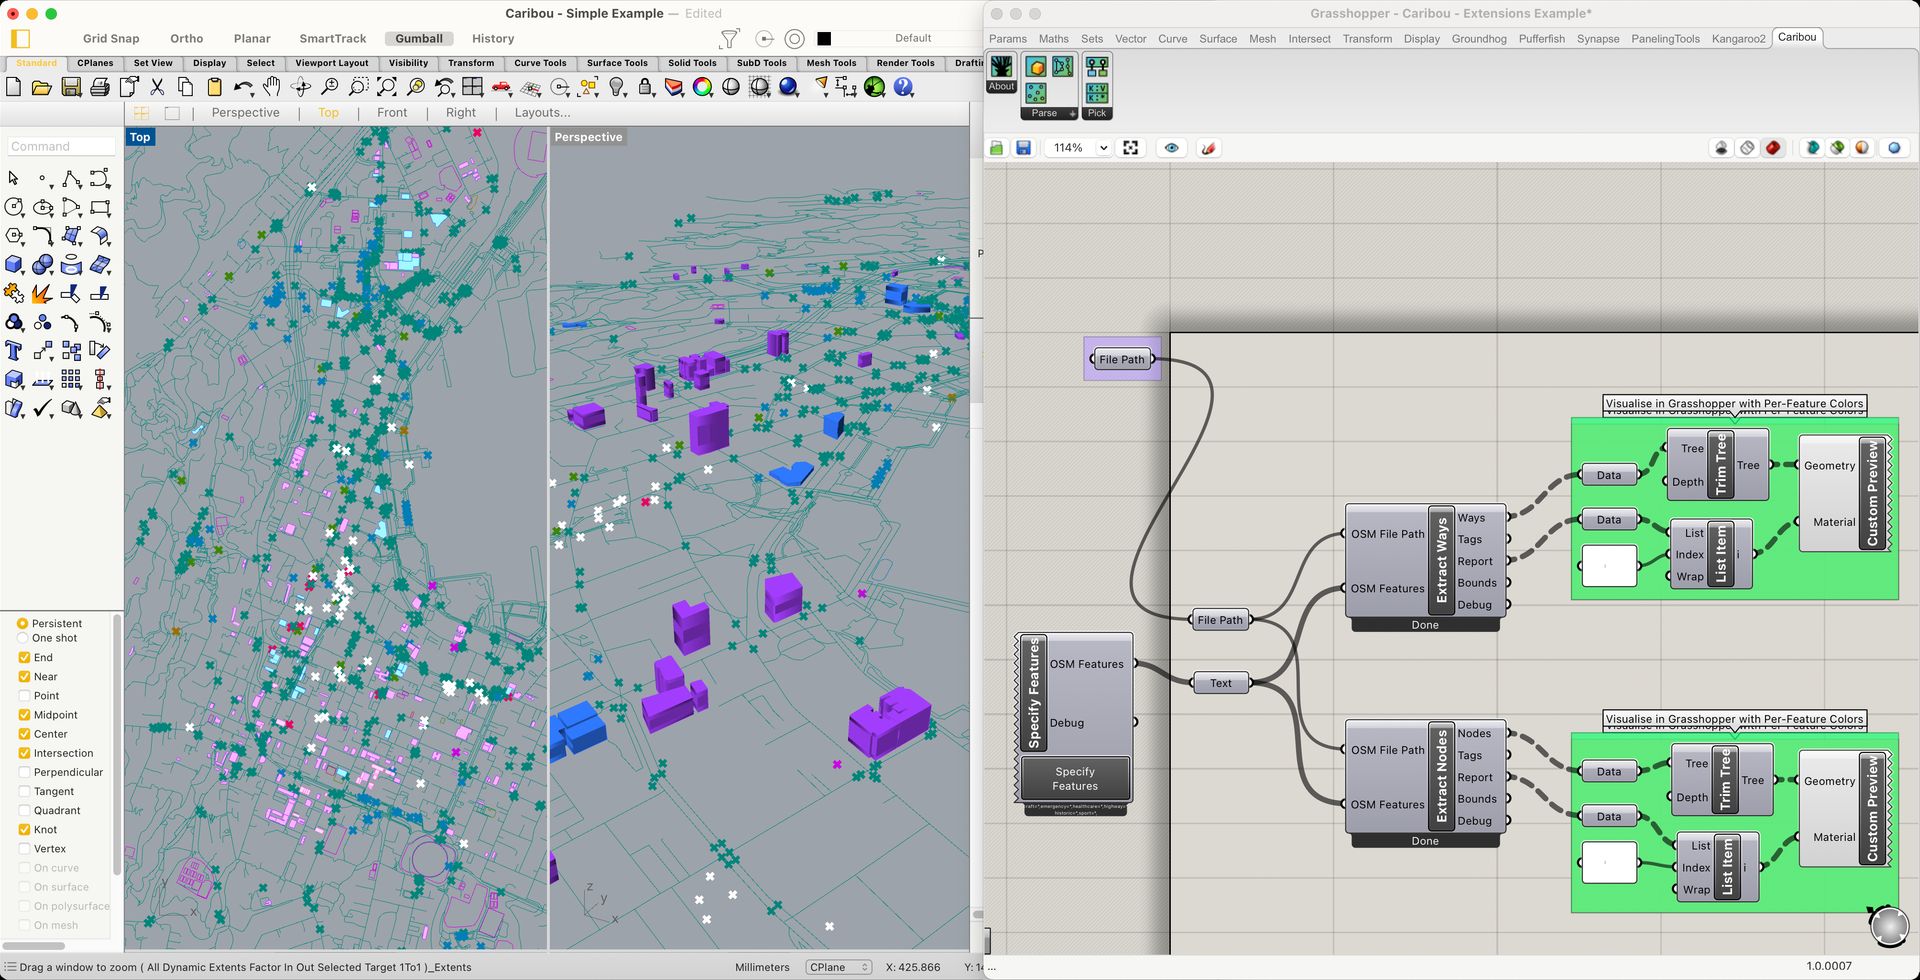 A screenshot of a CAD application showing a city model on the left and a parametric model on the right